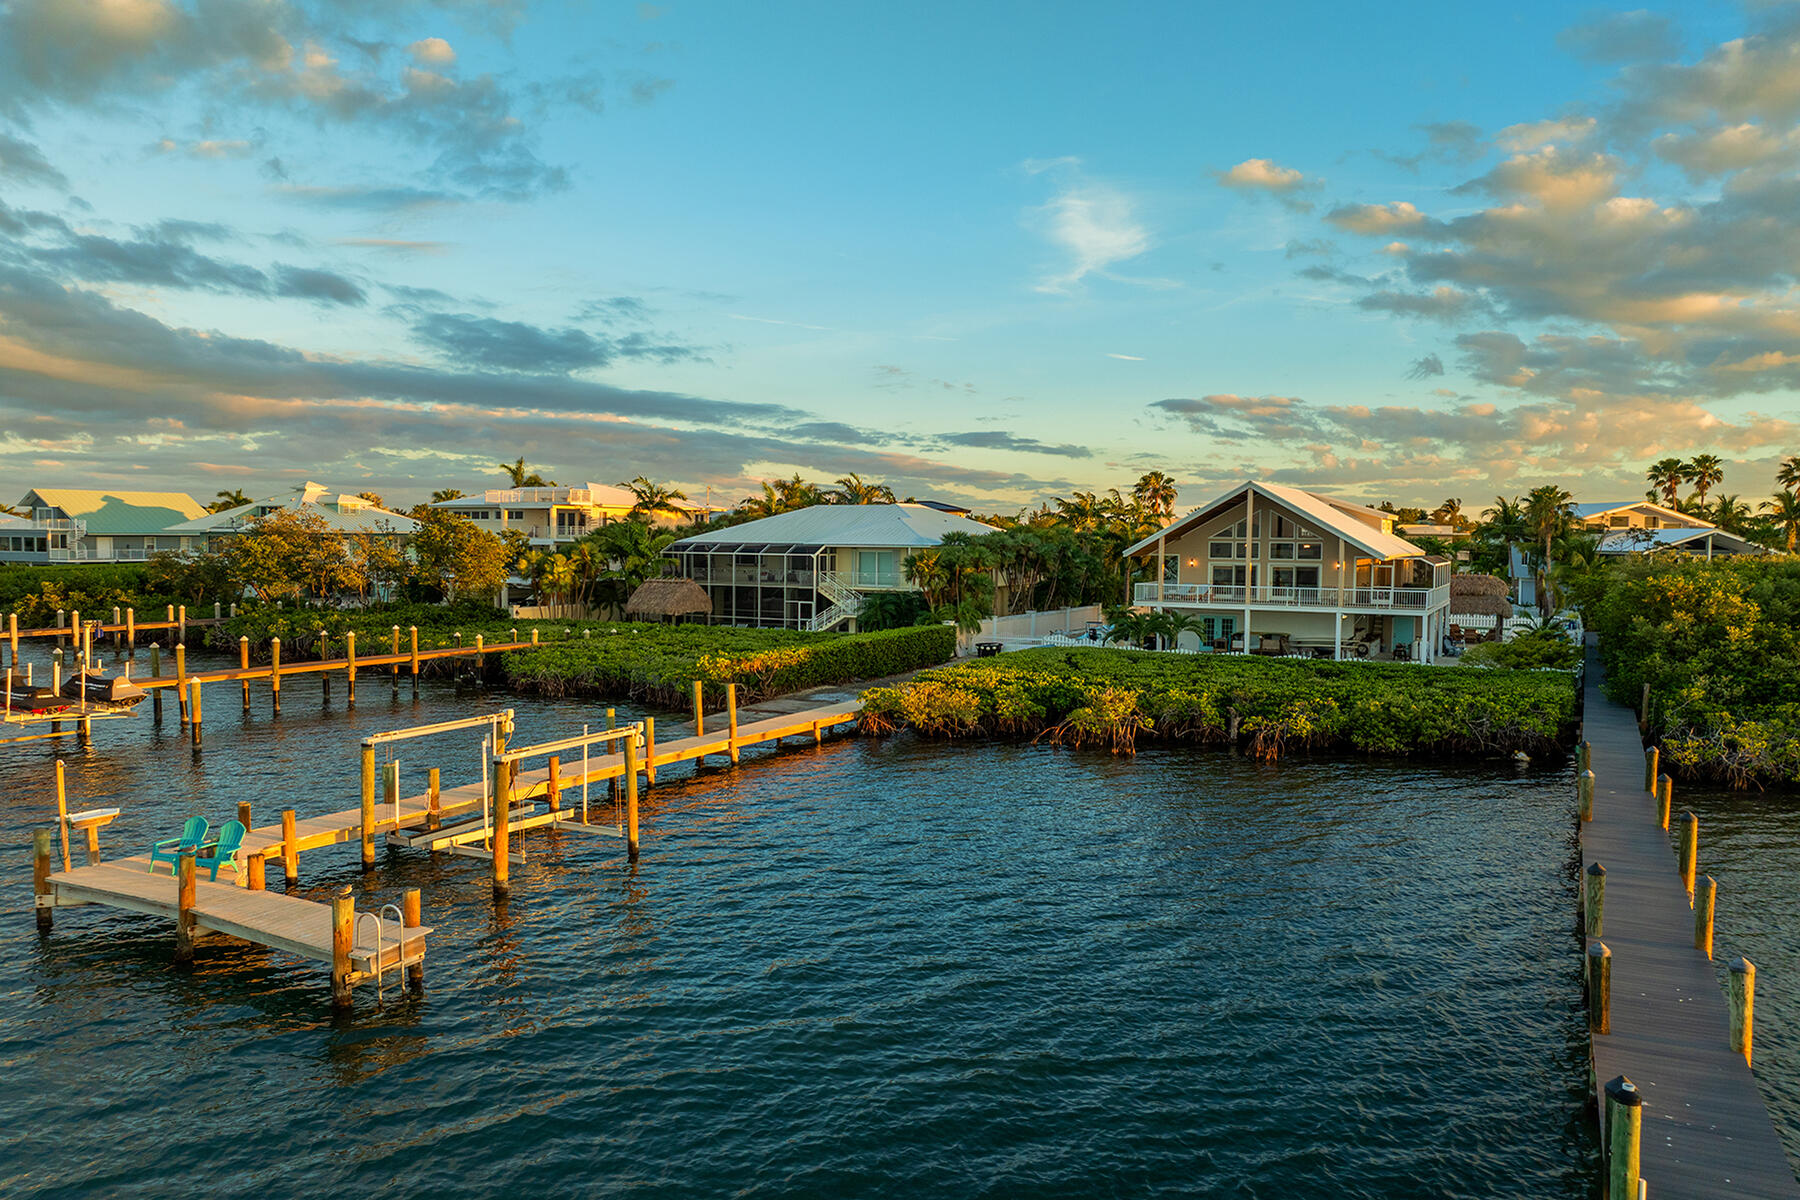 Dock to house views